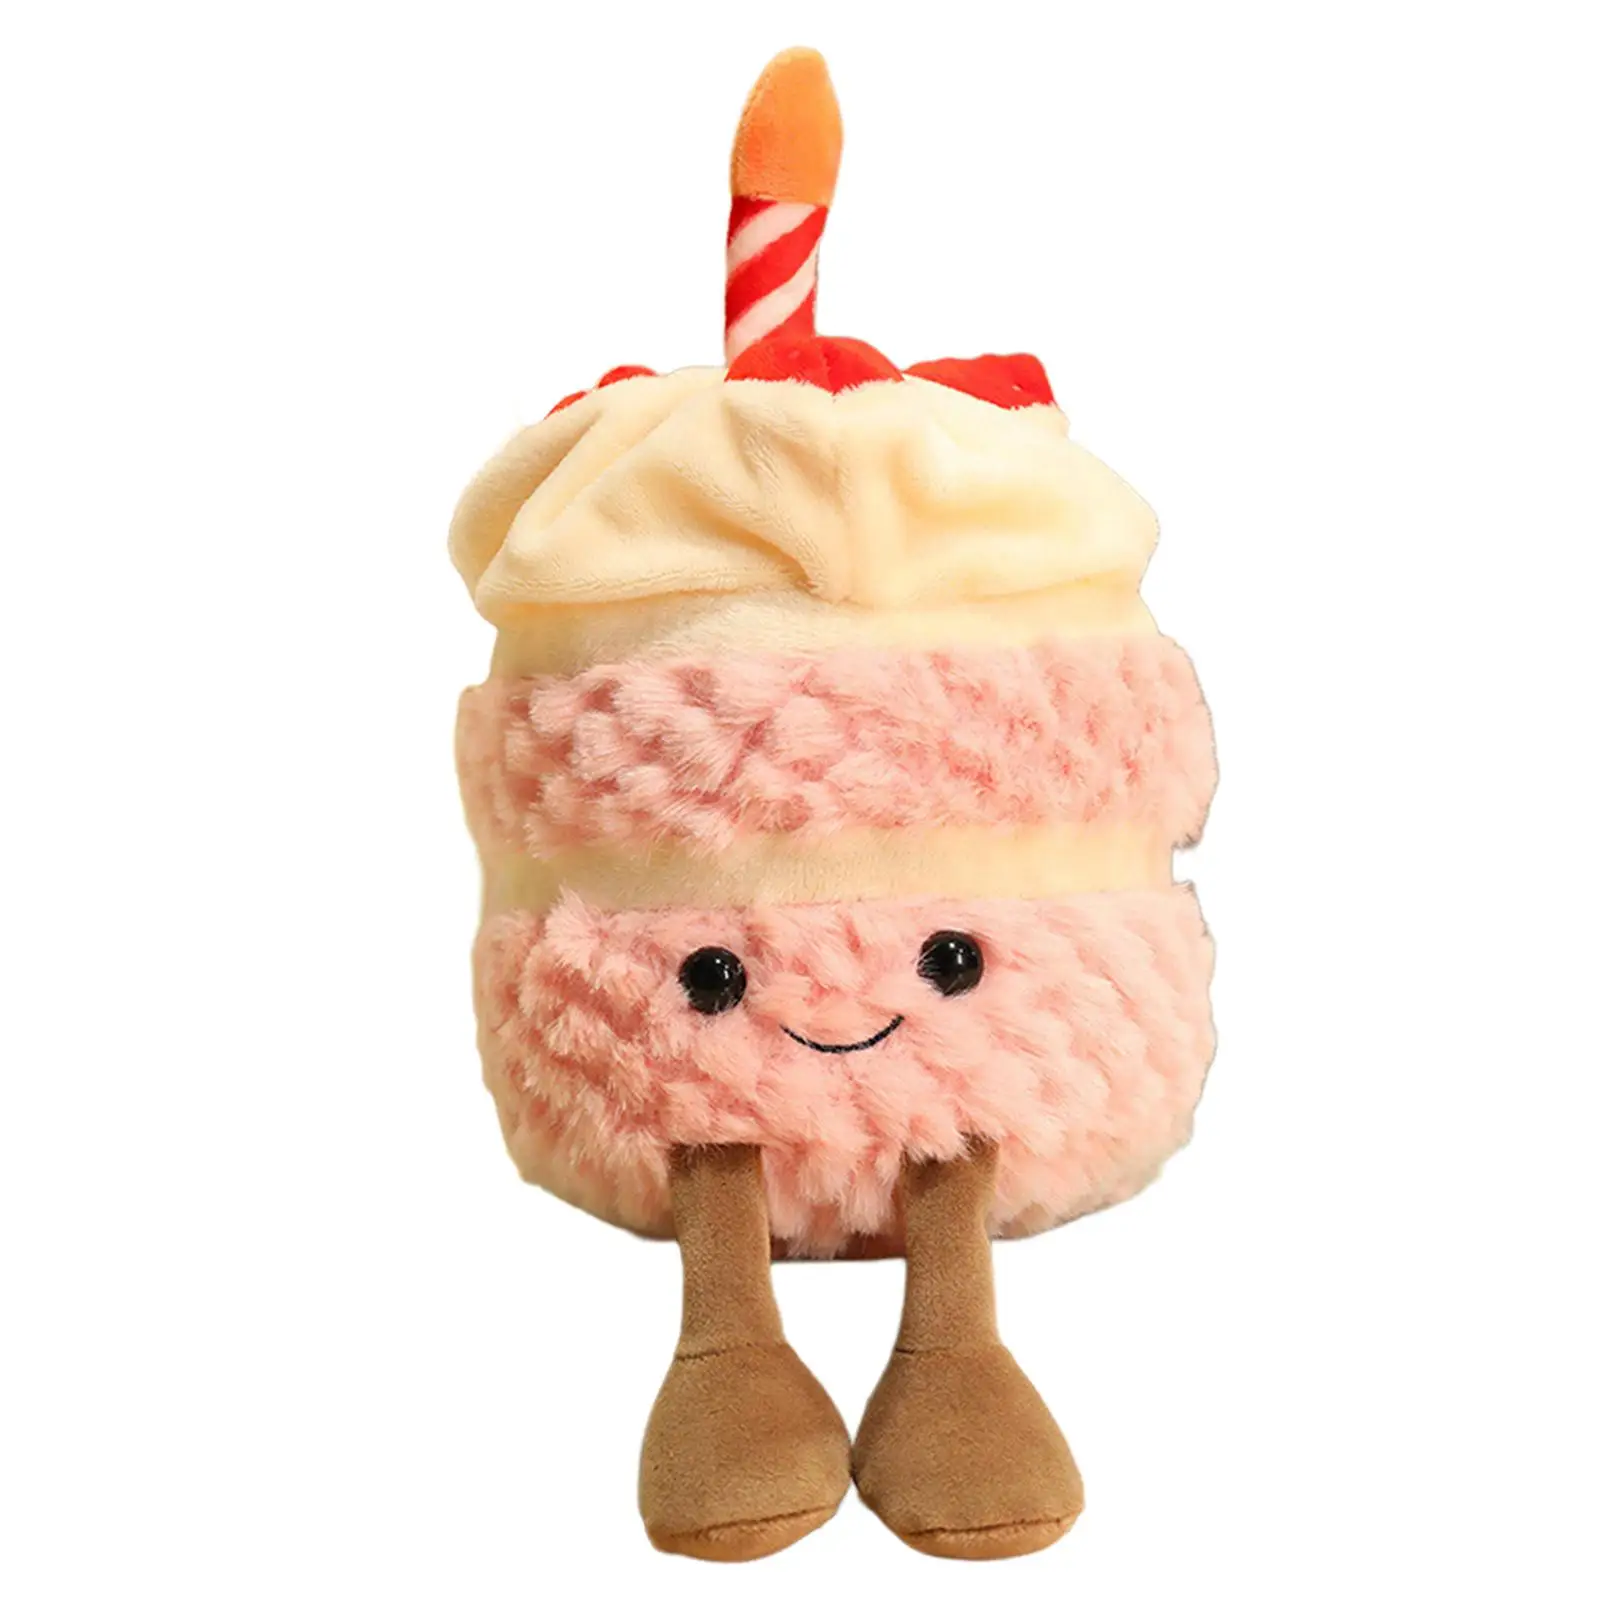 Cupcake Stuffed Plush Toys Room Decoration Soft for Home Bedroom Party Favor